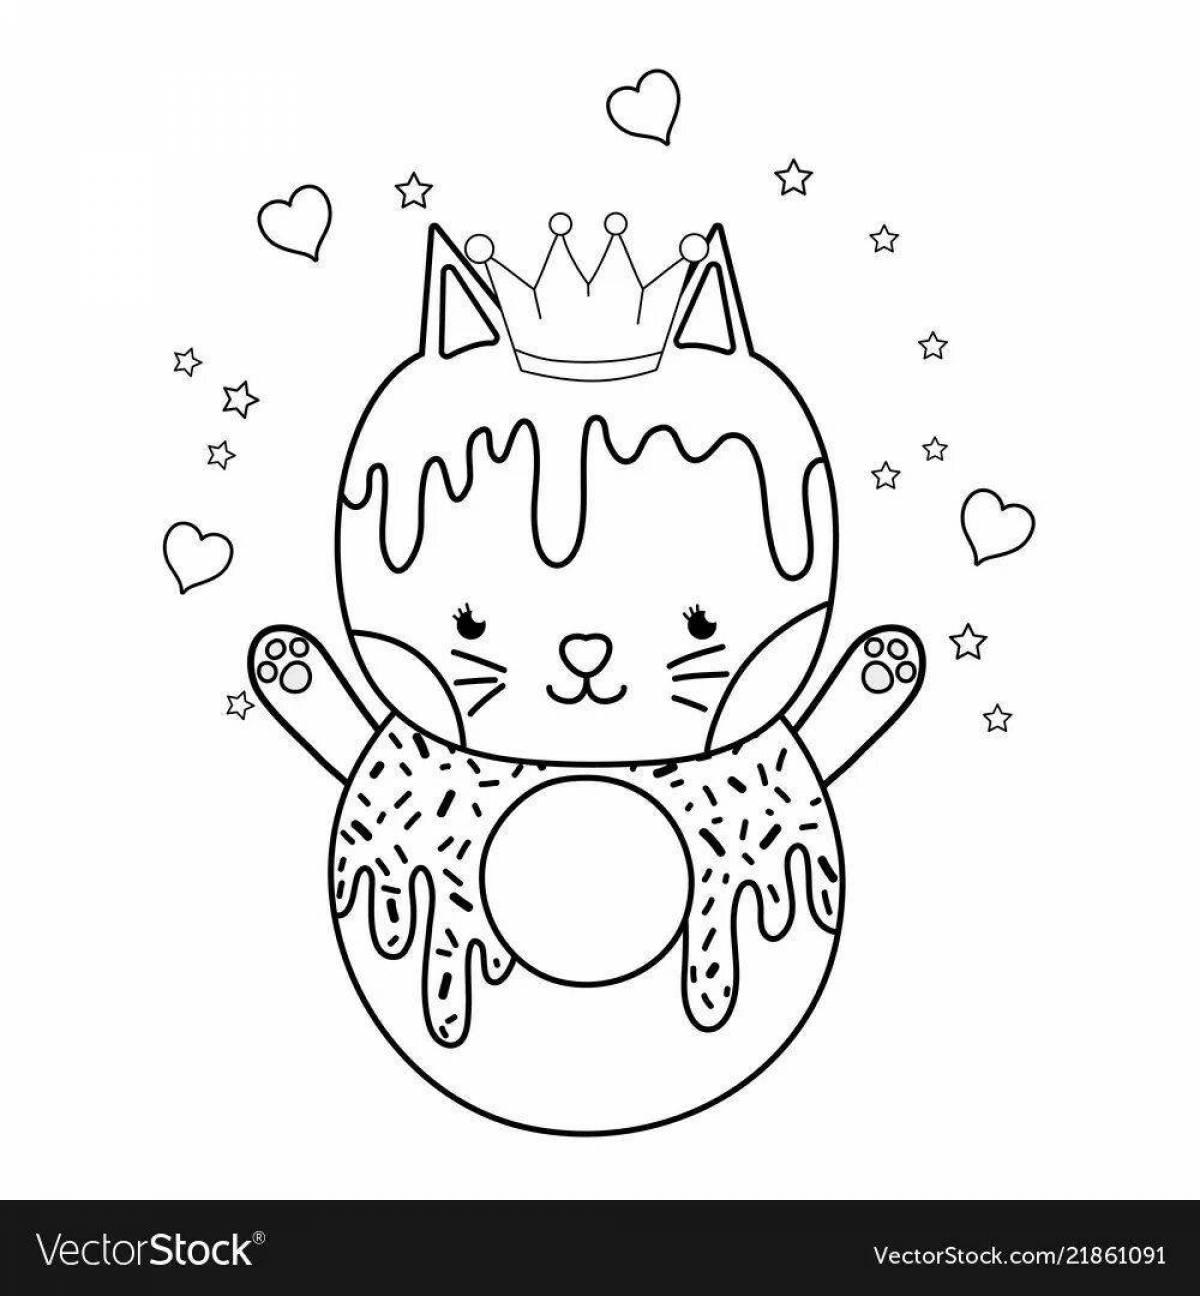 Adorable donut cat coloring book